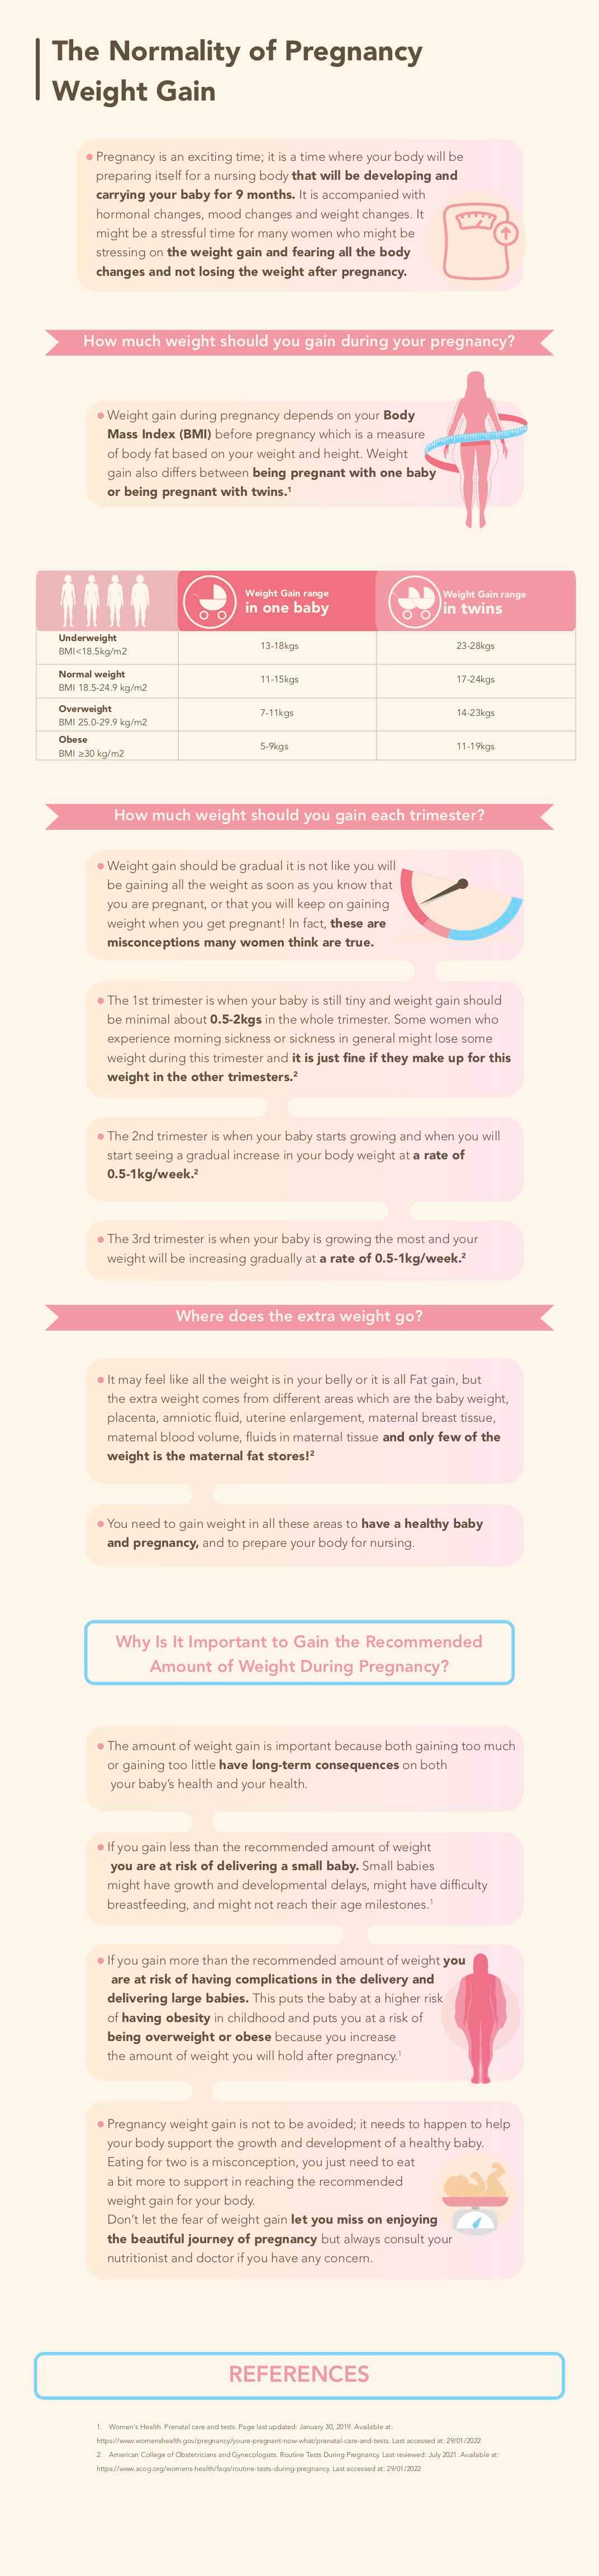 The Normality of Weight Gain During Pregnancy